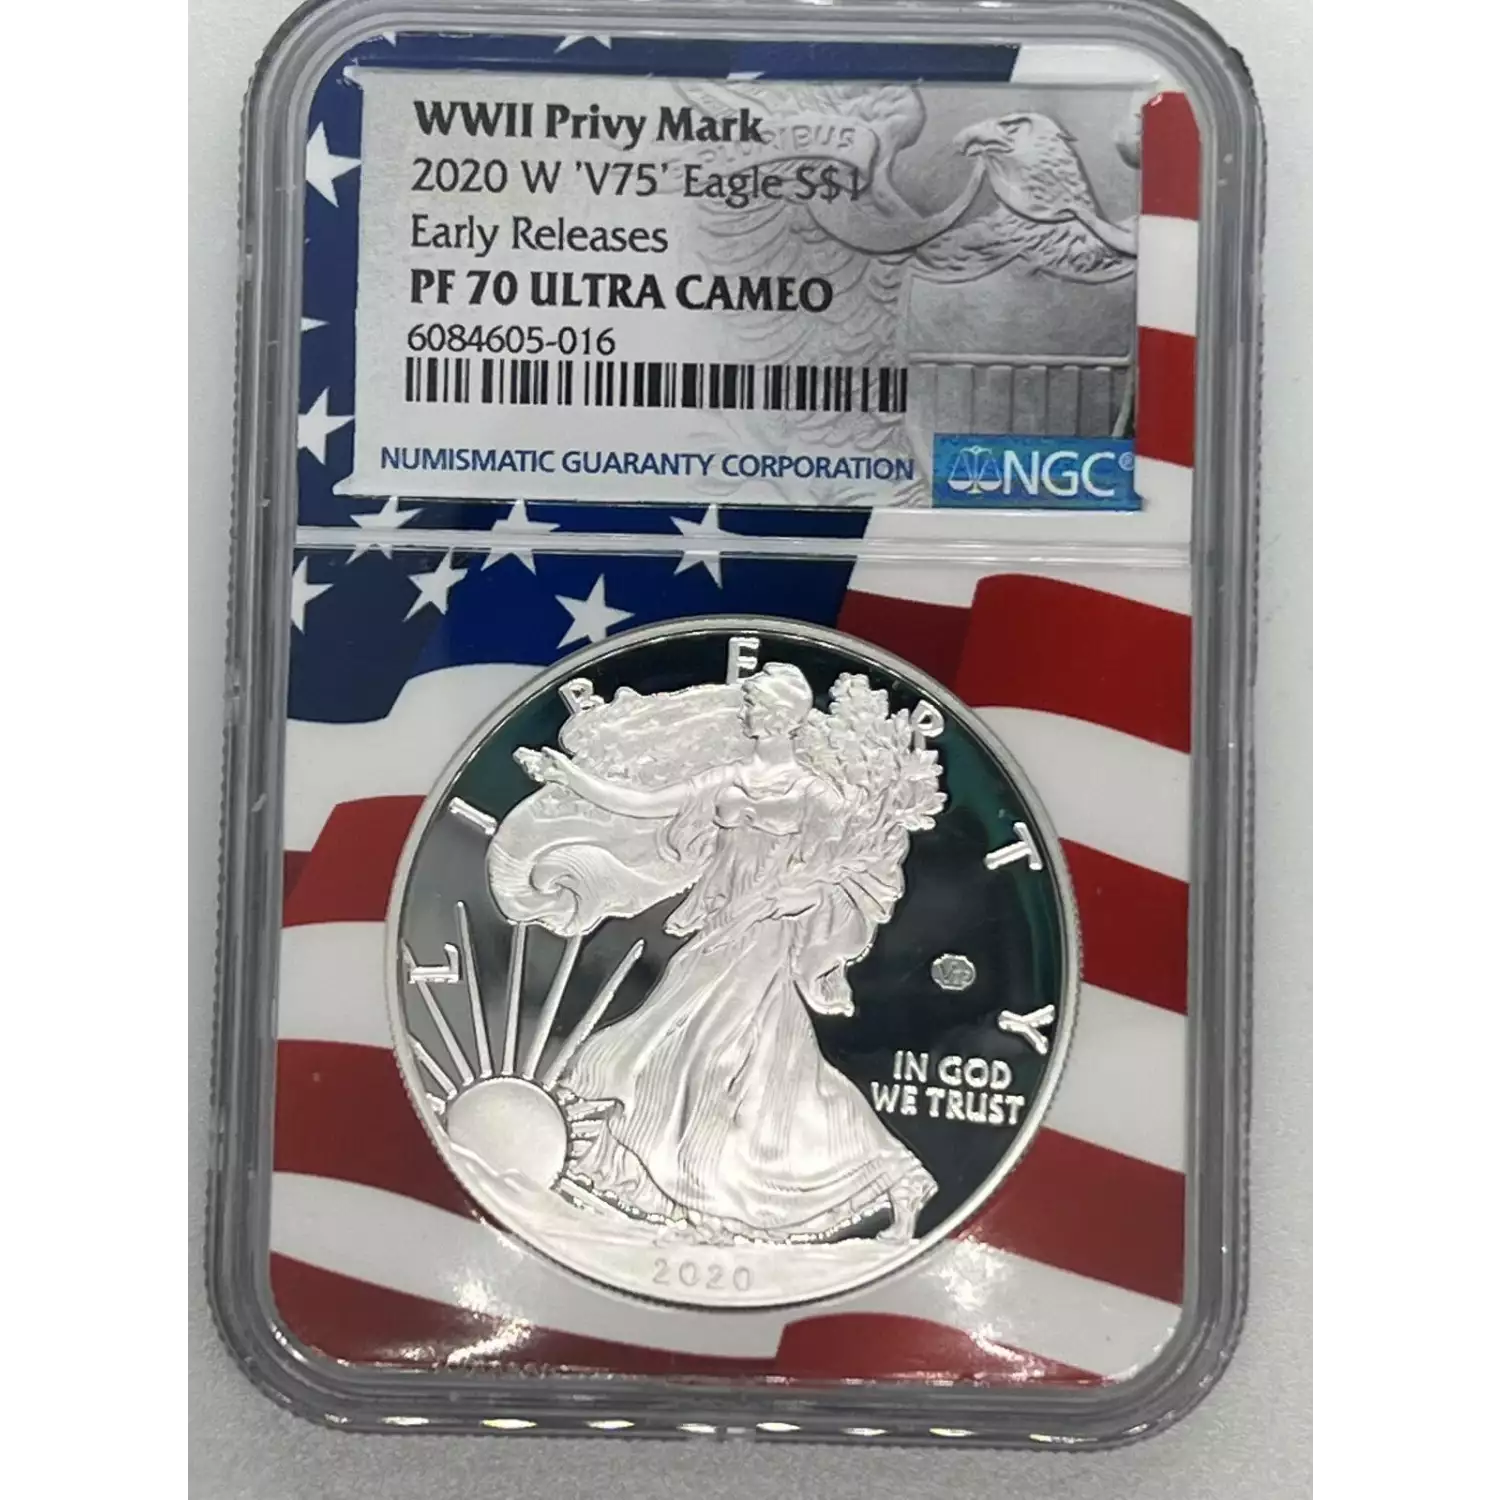 2020 W 'V75' Early Releases ULTRA CAMEO